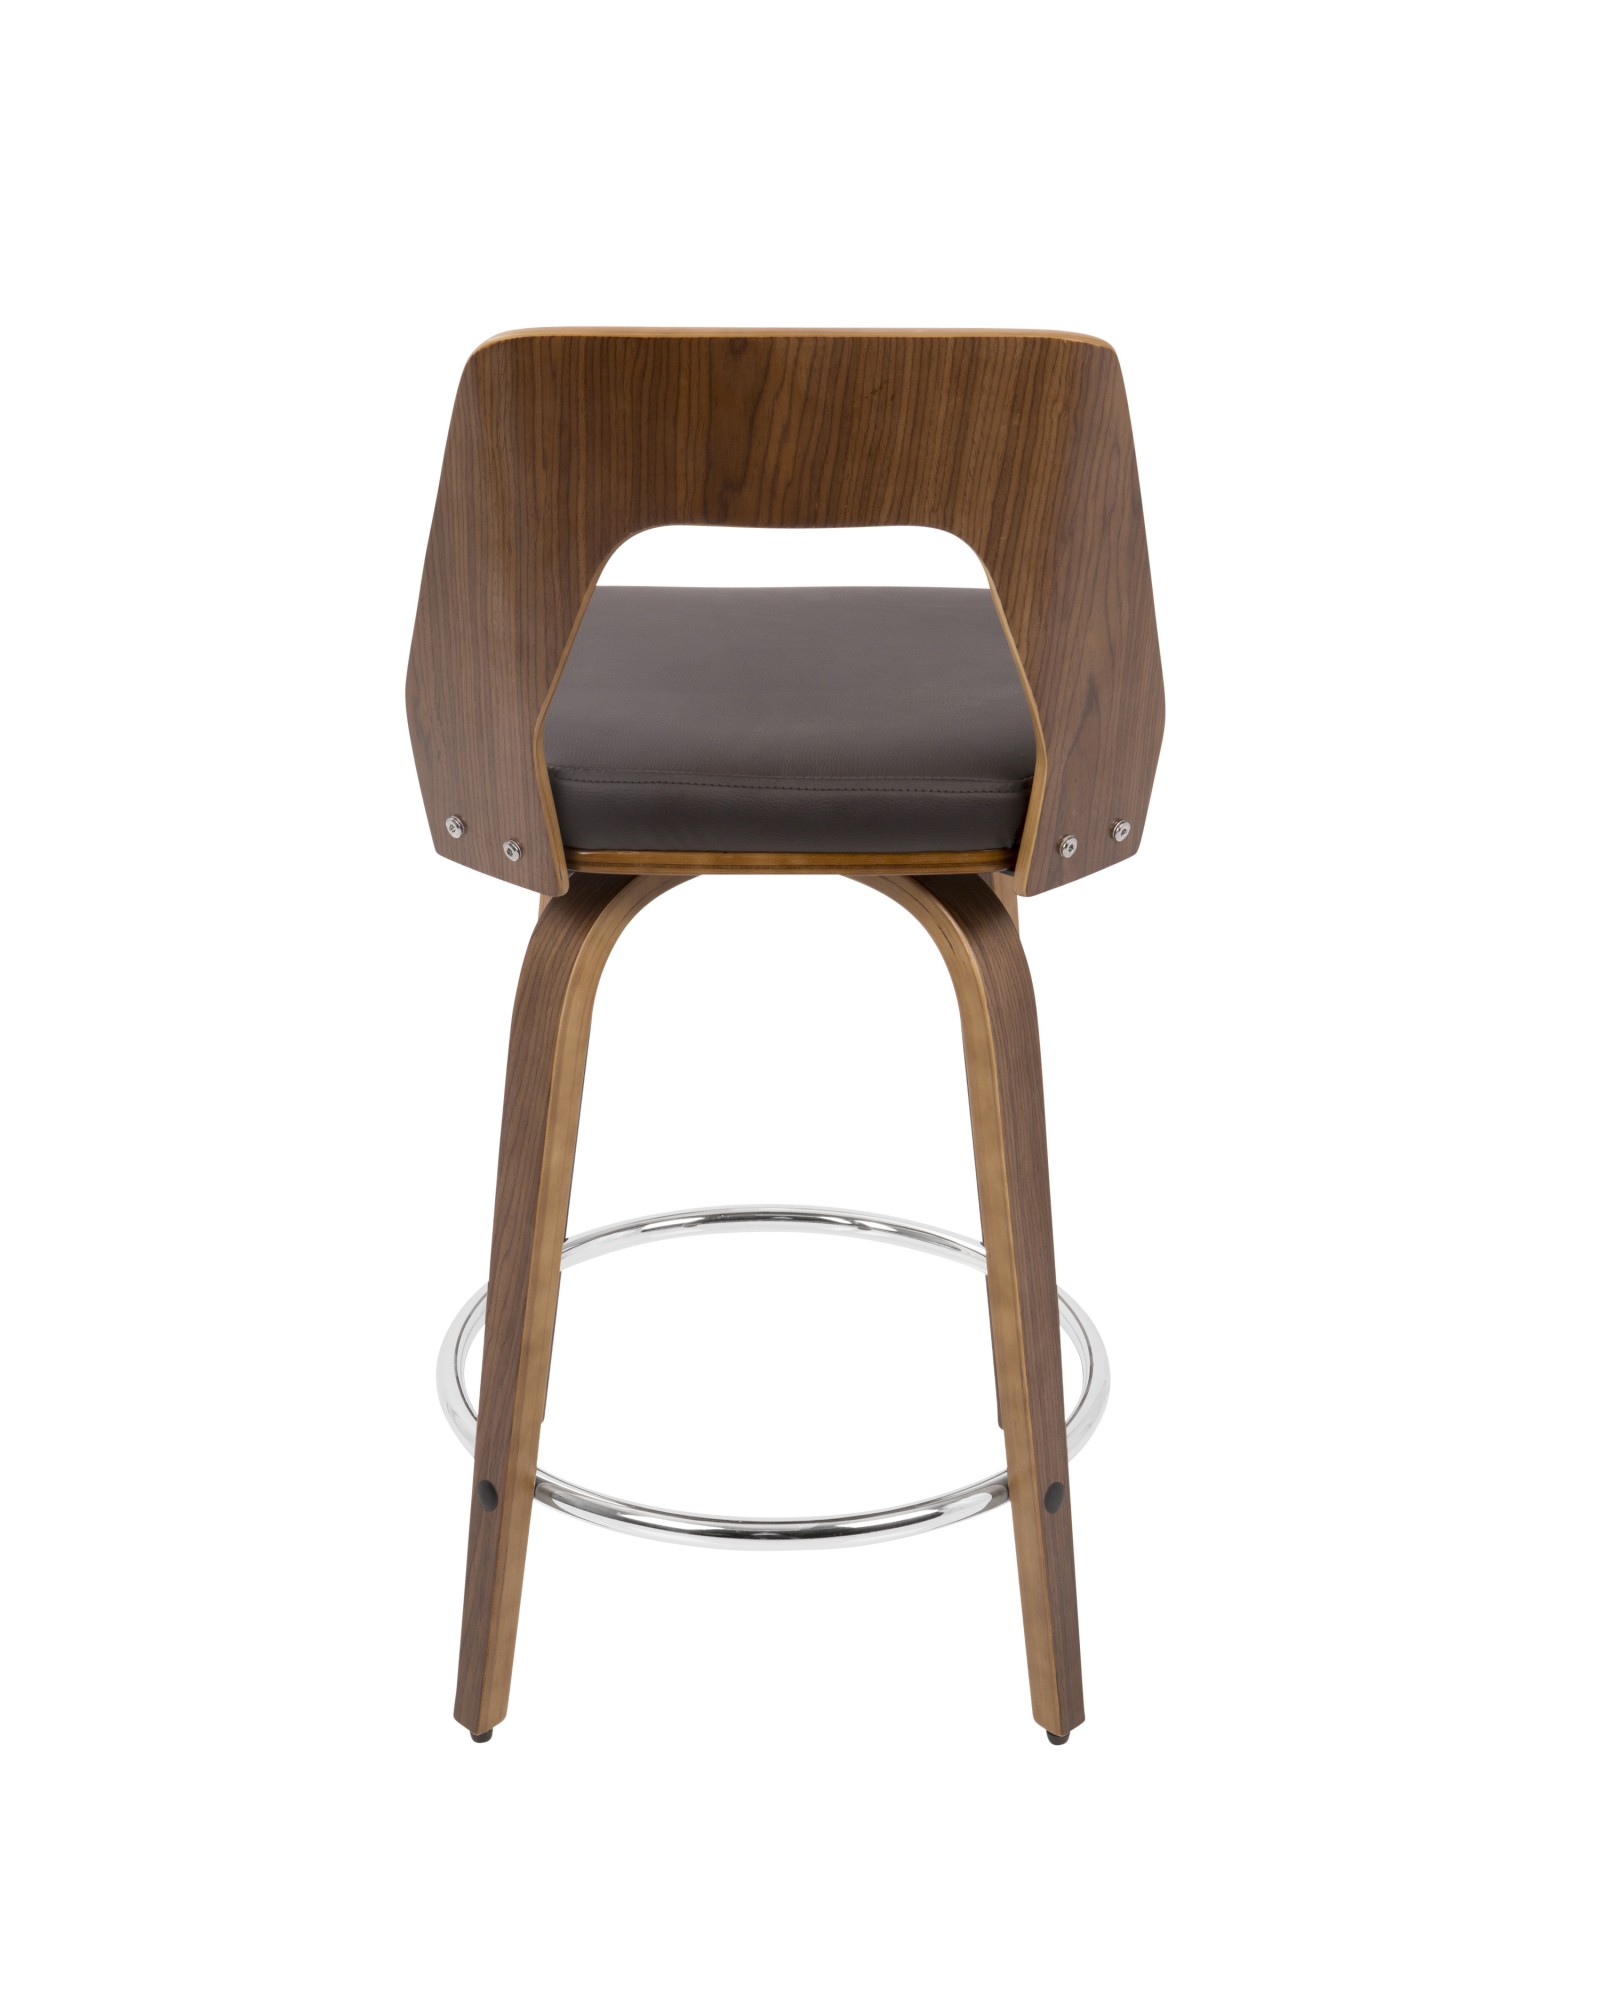 Trilogy Mid-Century Modern Counter Stool in Walnut and Brown Faux Leather